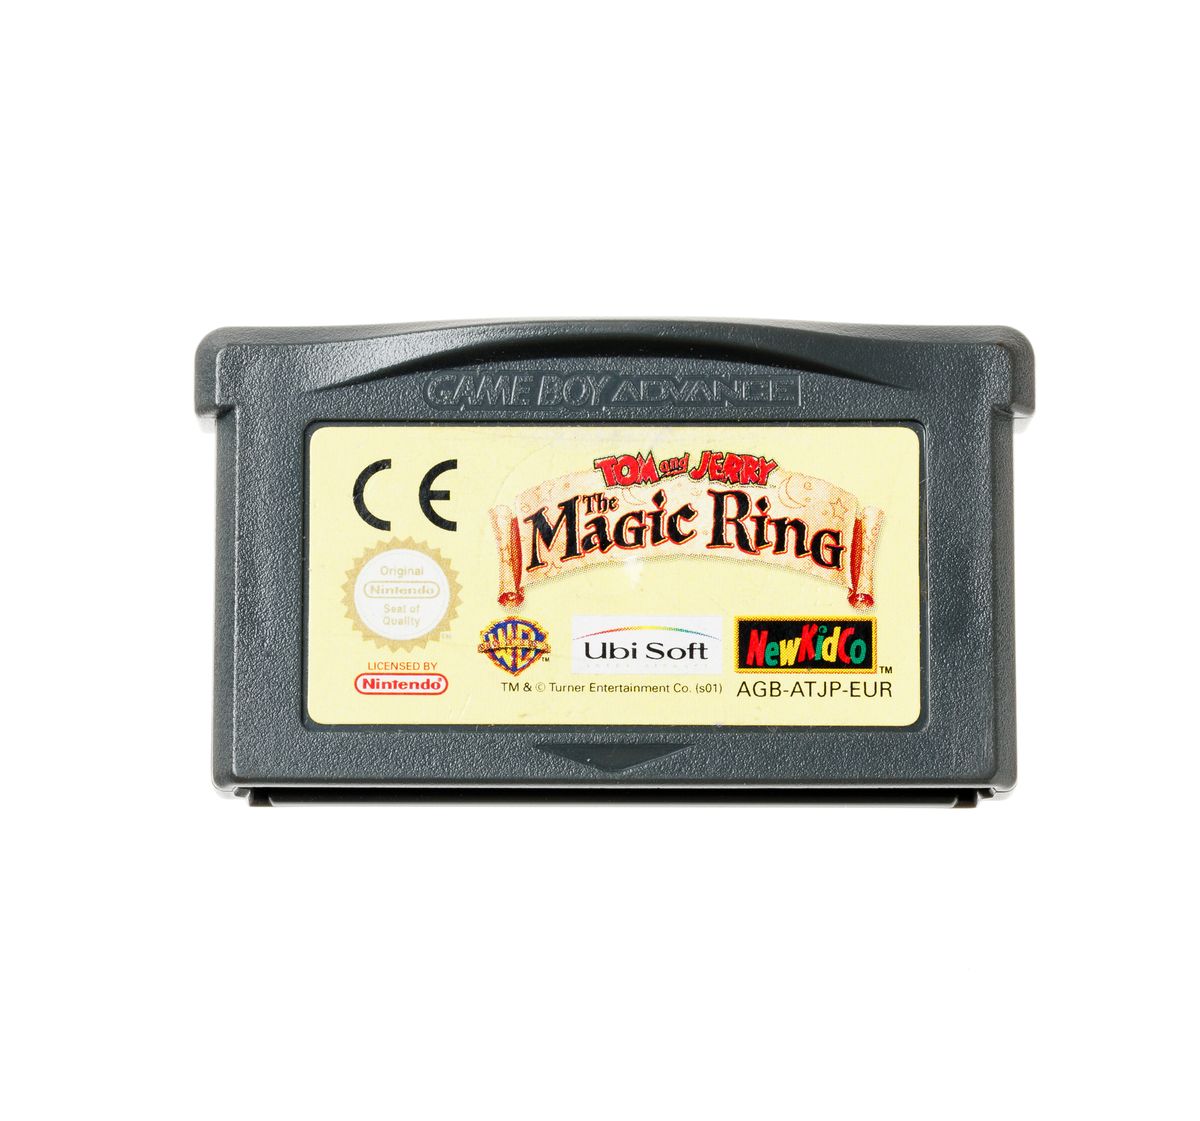 Tom and Jerry: The Magical Ring Kopen | Gameboy Advance Games